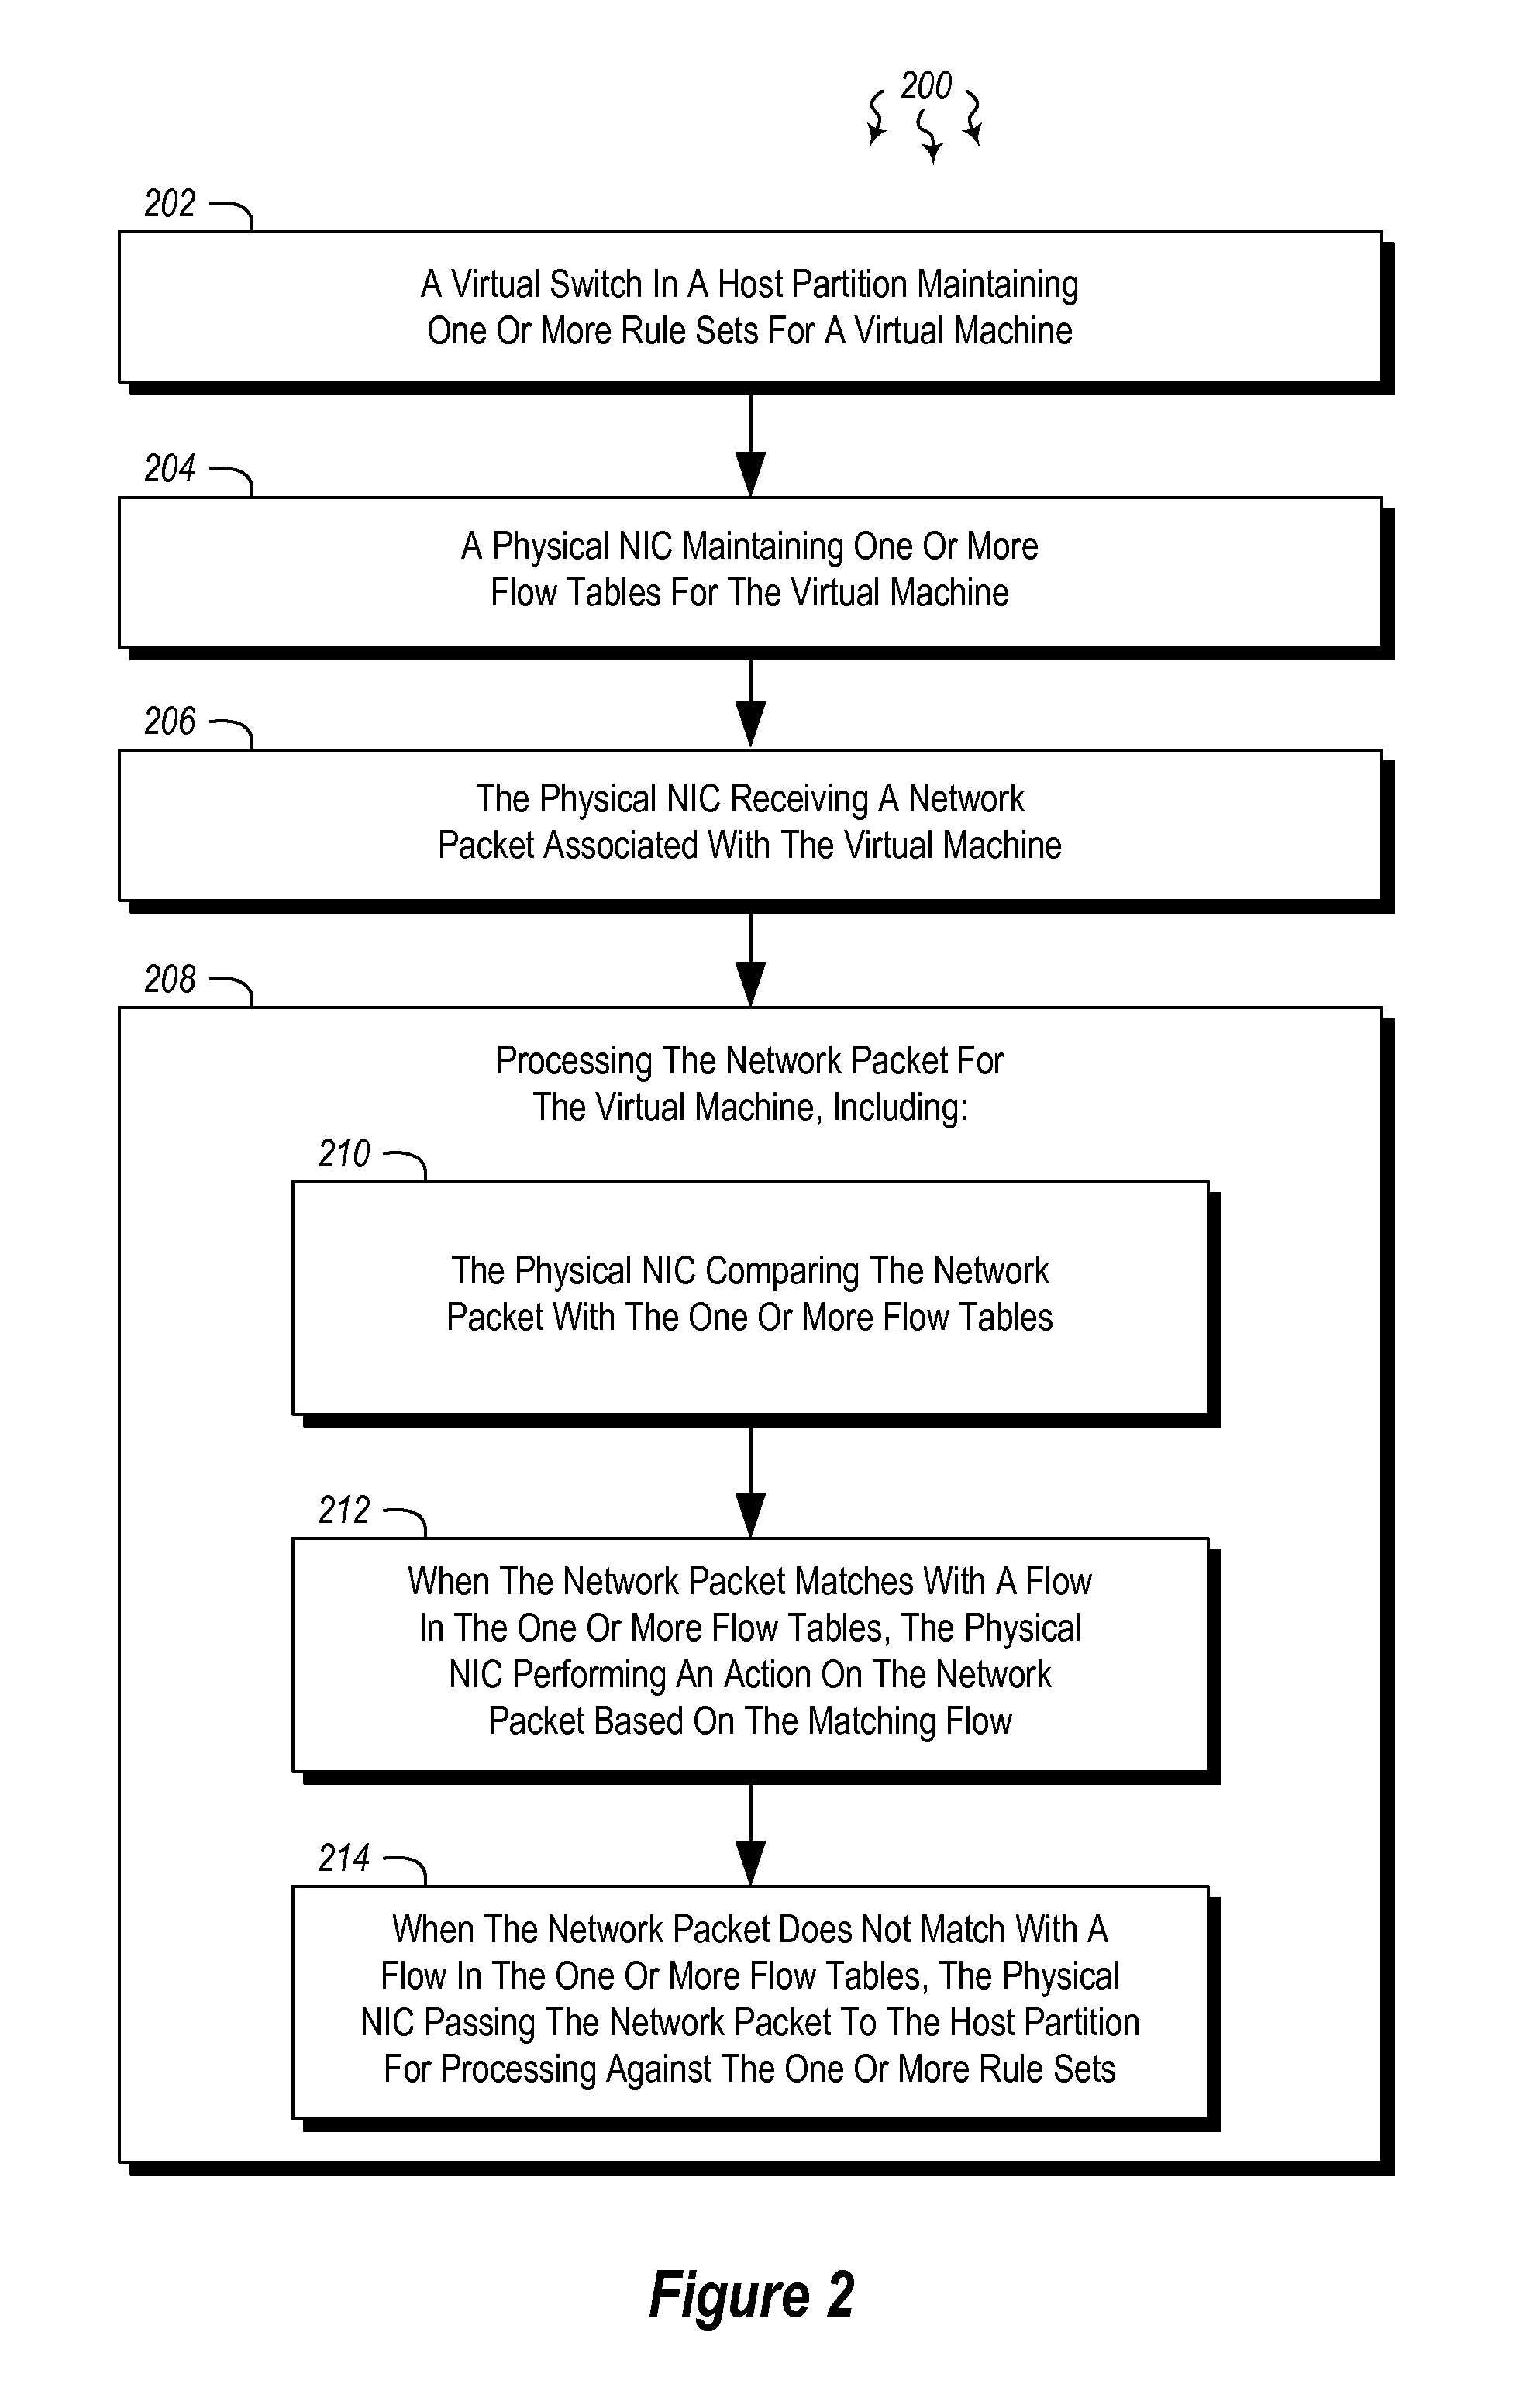 Offloading packet processing for networking device virtualization